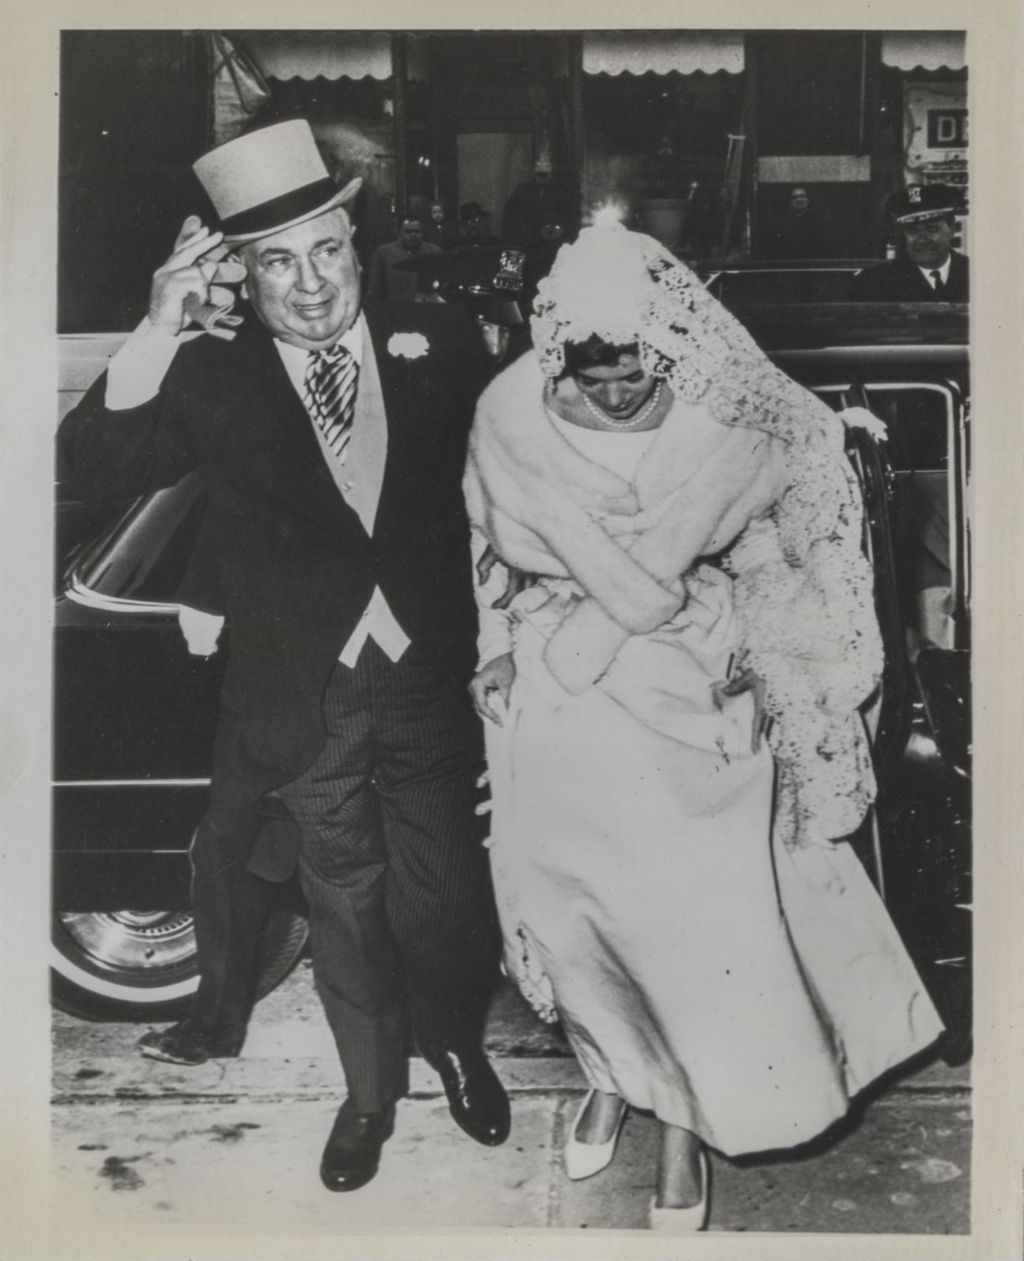 Richard J. Daley with his daughter Mary Carol on her wedding day